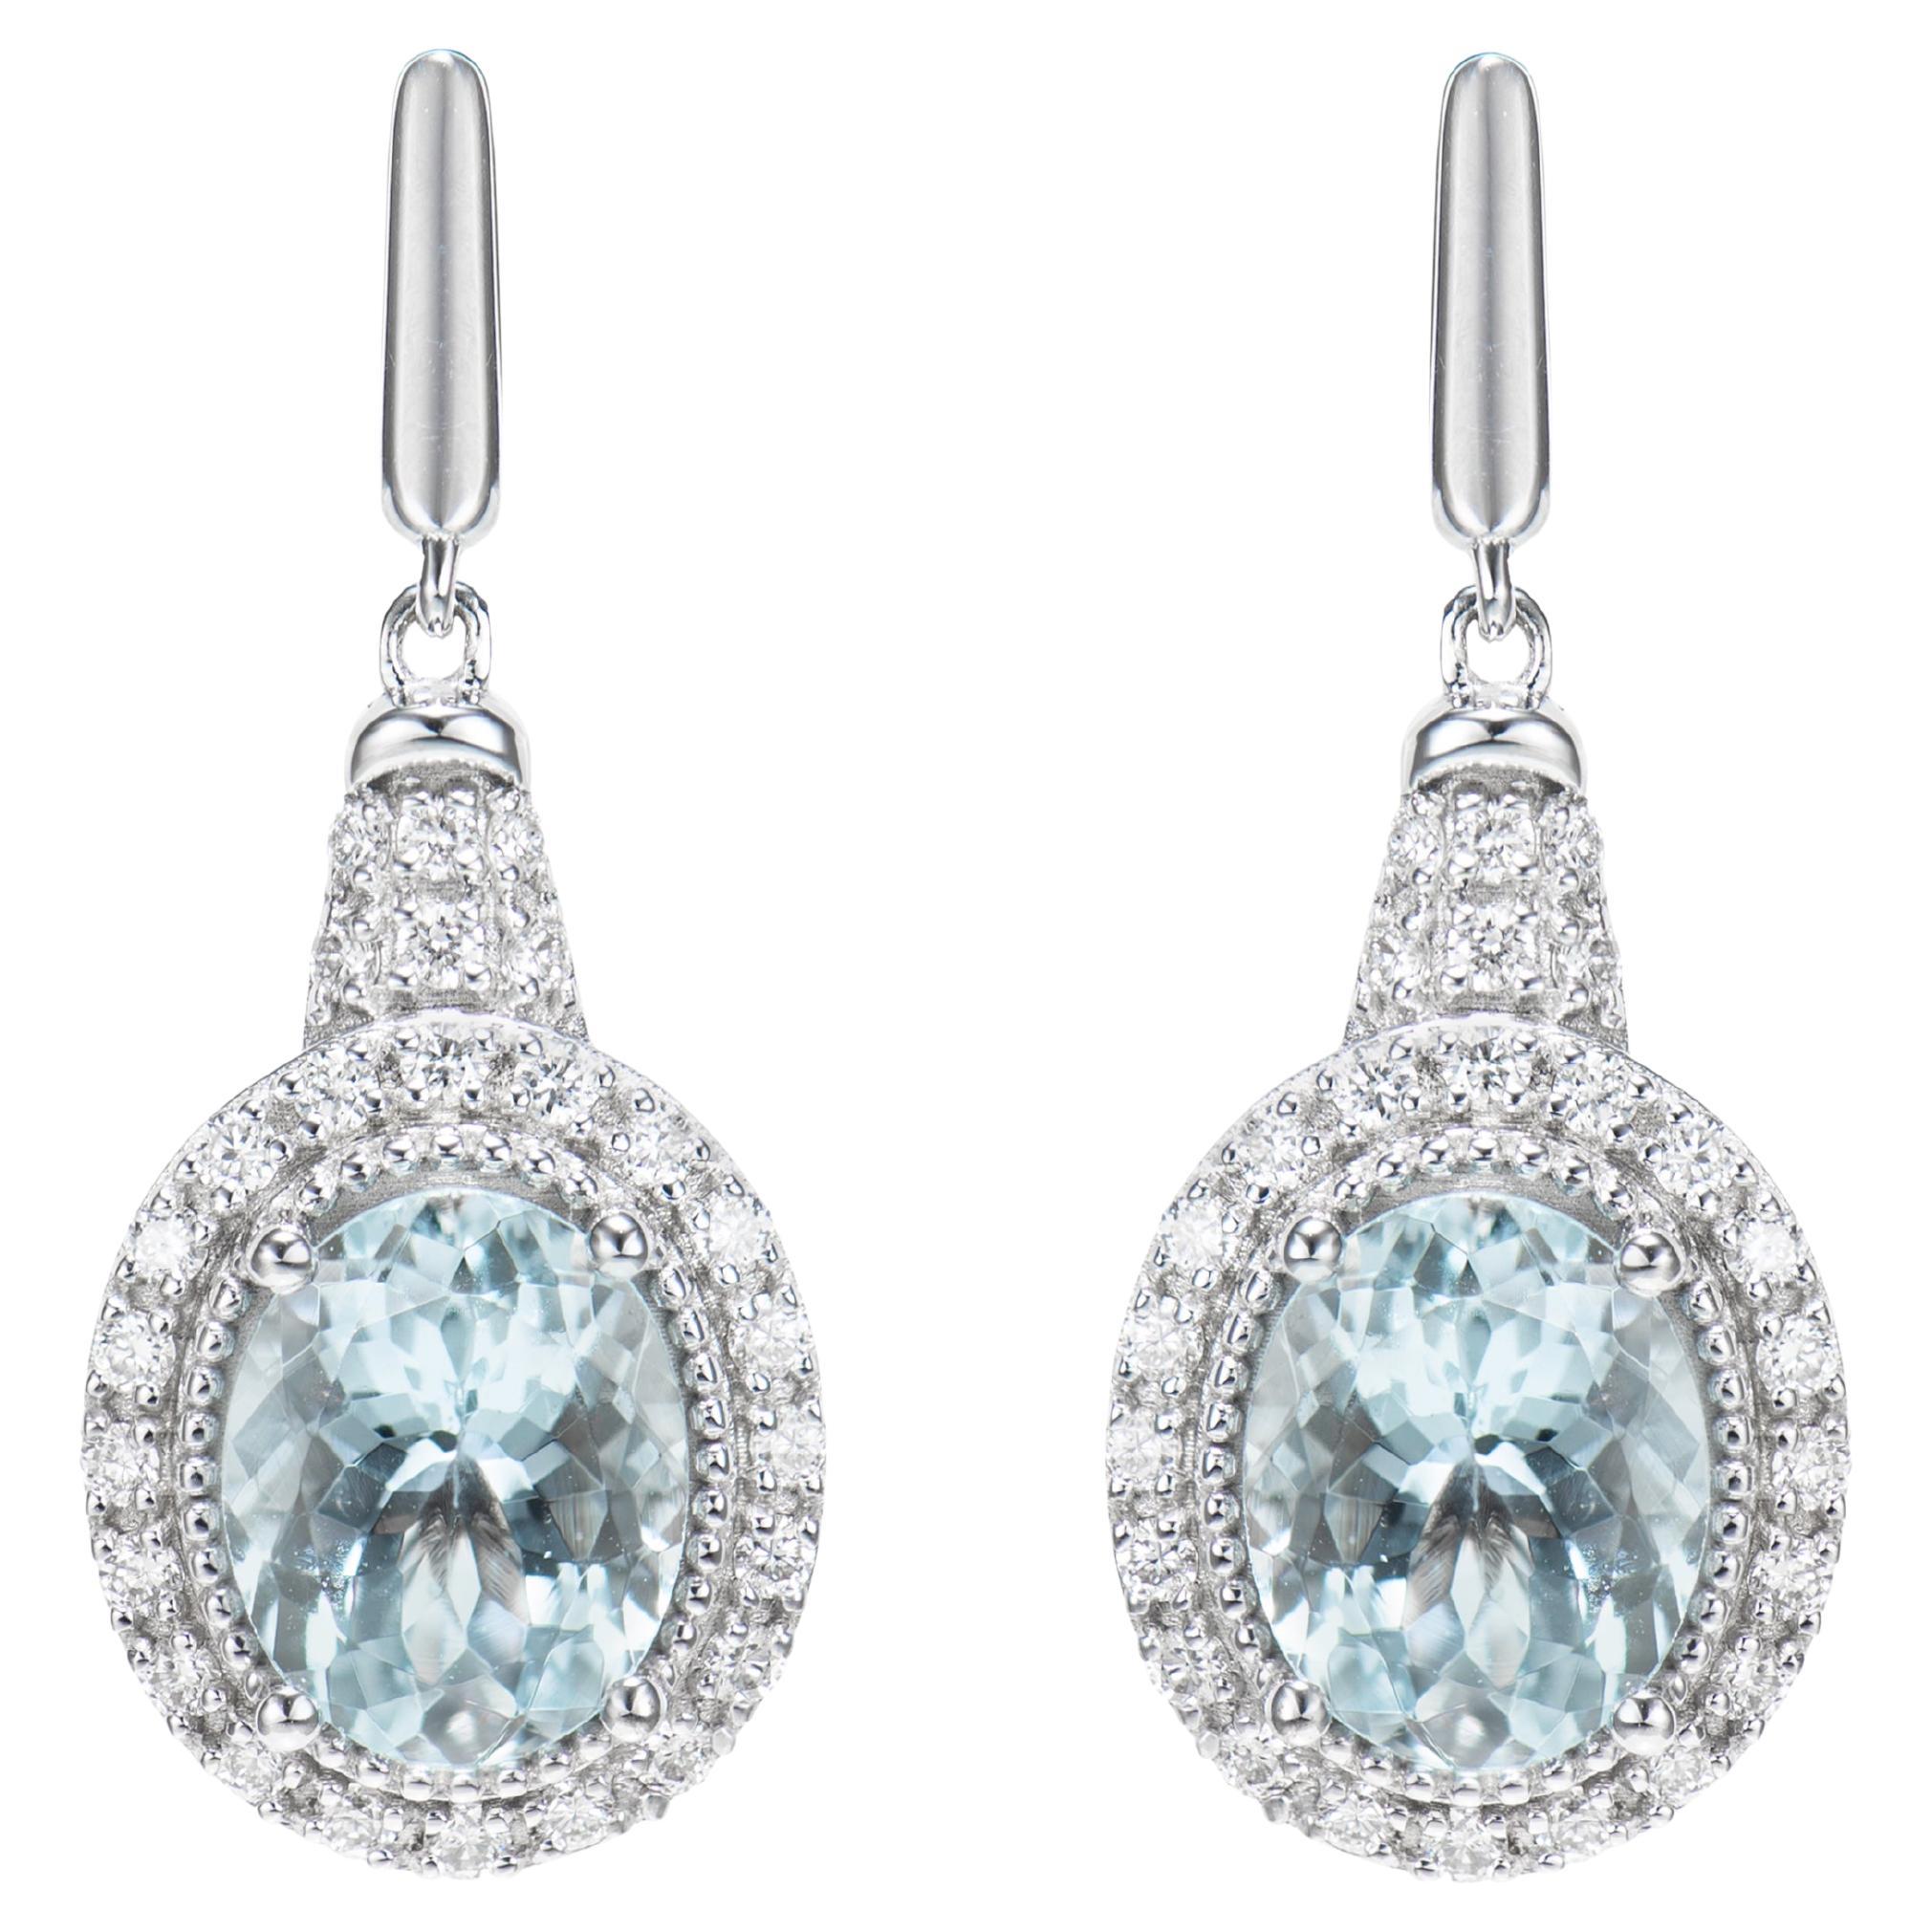 Aquamarine and White Diamond Drops Earring in 18 Karat White Gold. For Sale